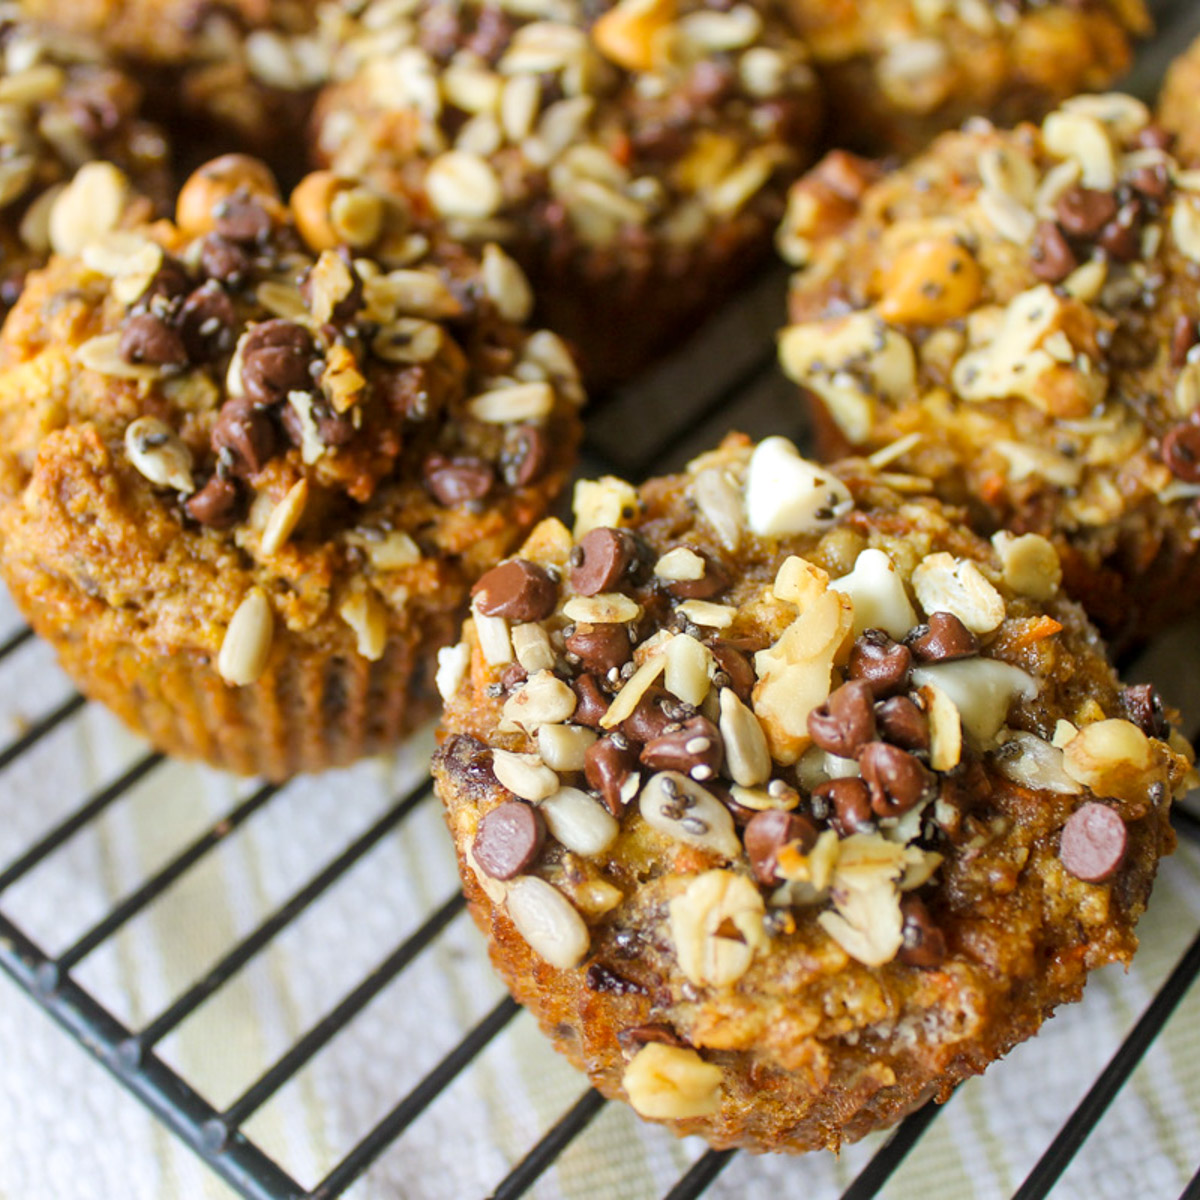 Morning Glory Carrot and Banana Muffins with lots of topping made from chocolate chips, sunflower seeds, chia seeds, walnuts, butterscotch and white chocolate chips.